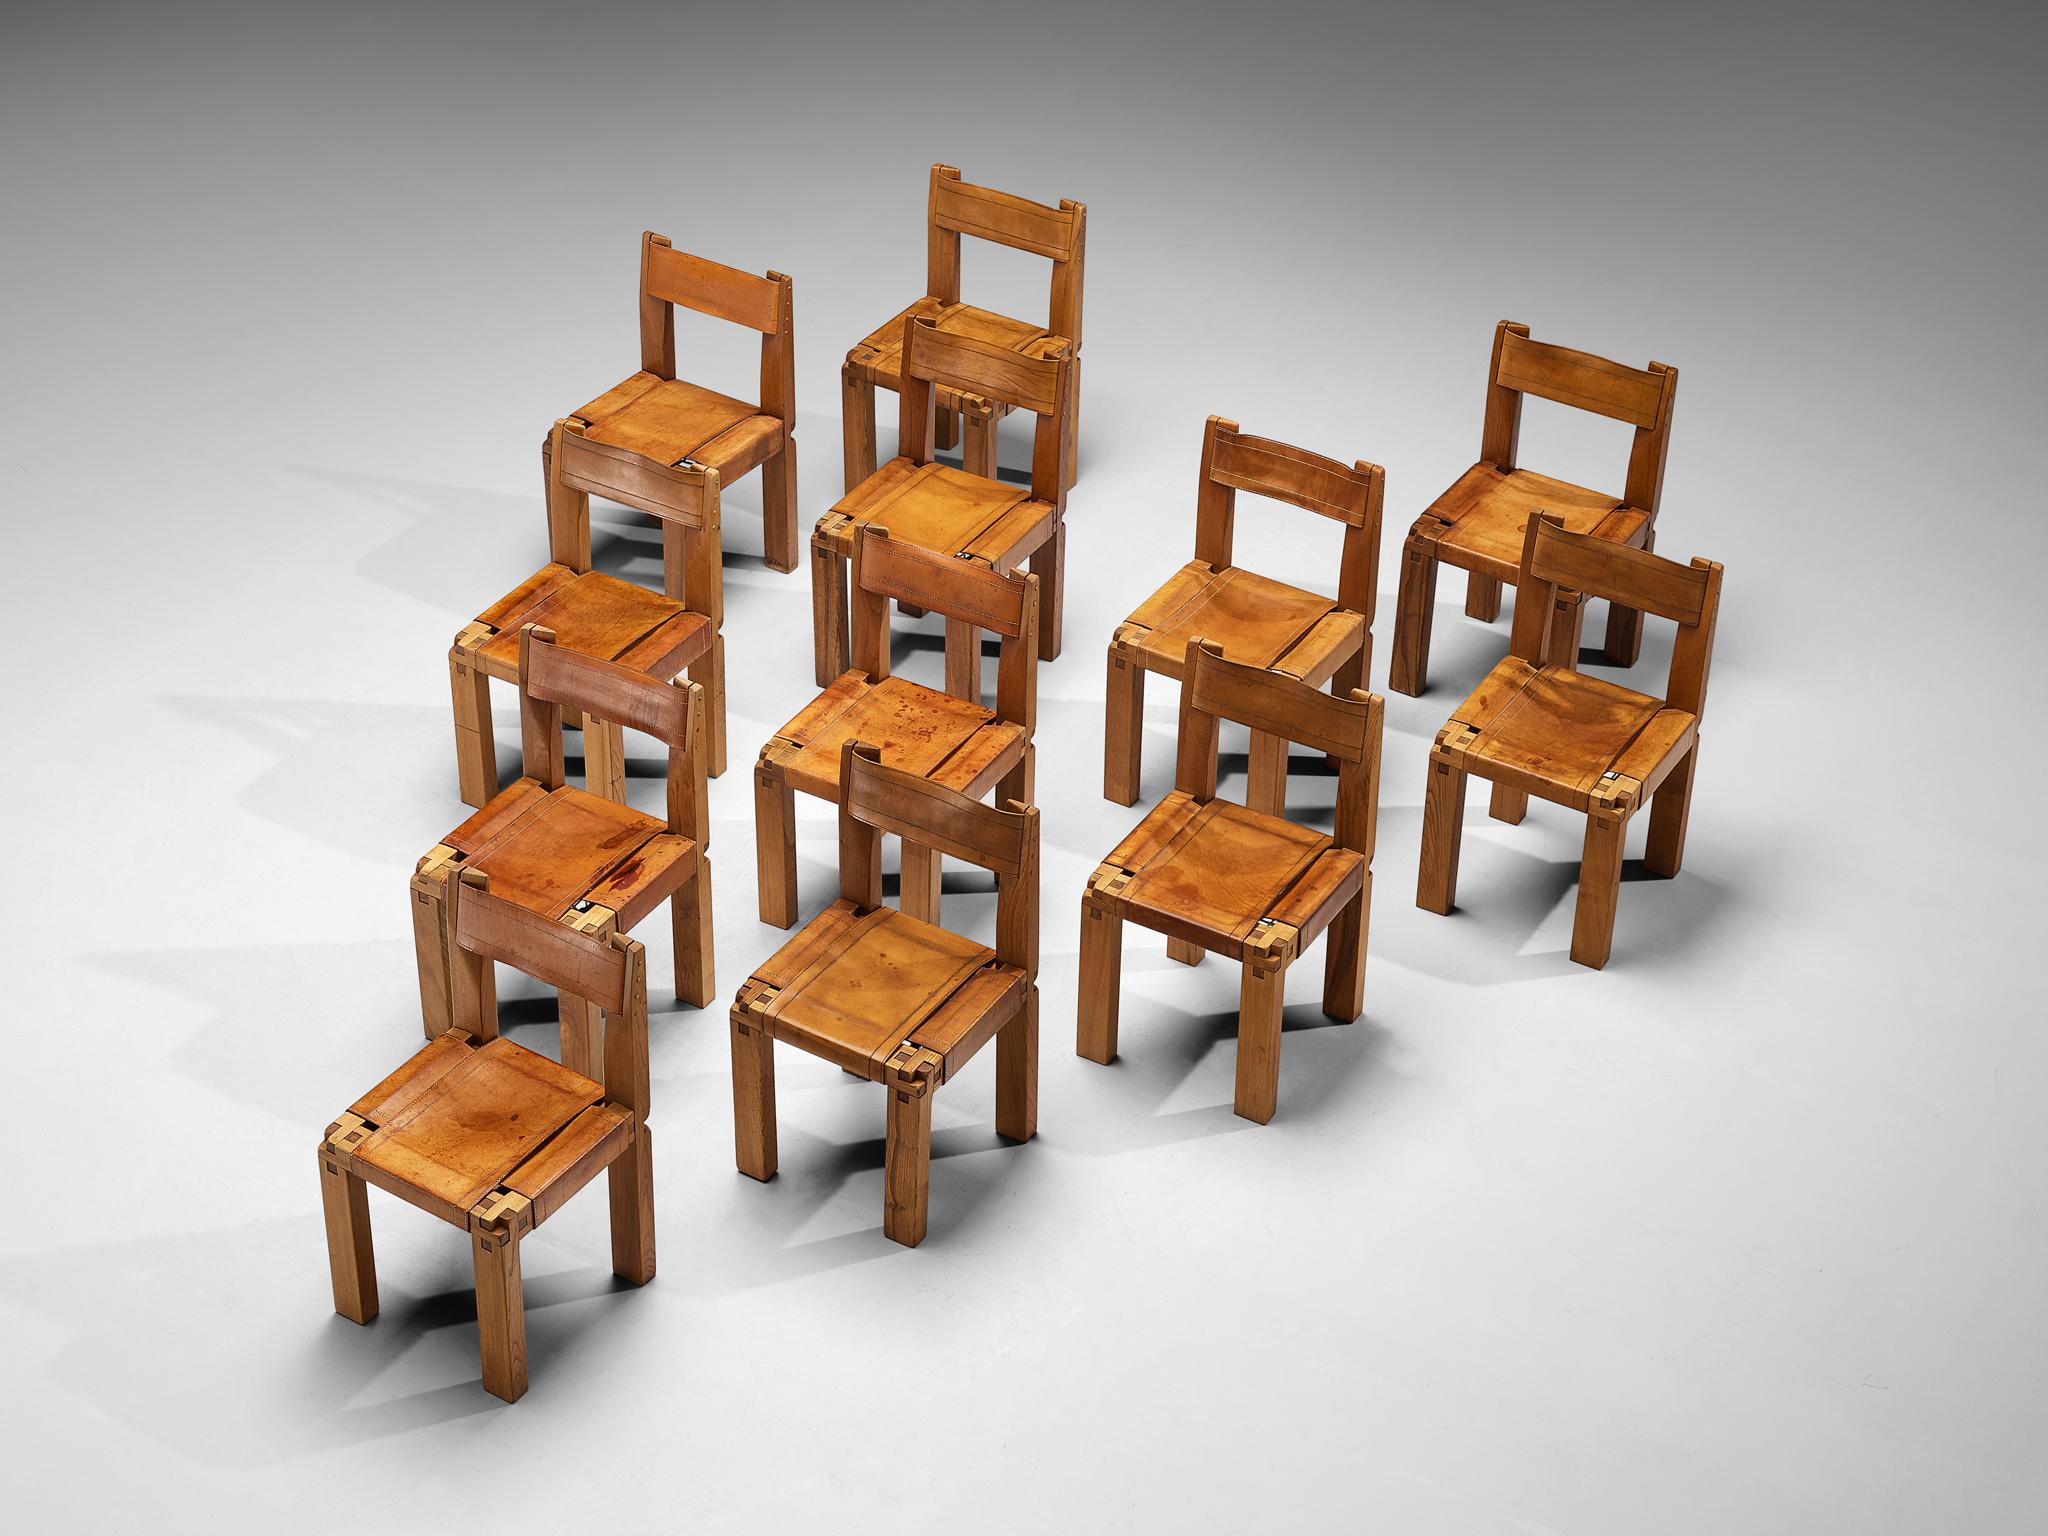 Pierre Chapo, set of twelve dining chairs, model 'S11', elm, leather, rope, France, circa 1978

This design is an early edition by Pierre Chapo. Crafted from solid elmwood, the chairs exhibit a refined cubic design that is both sleek and